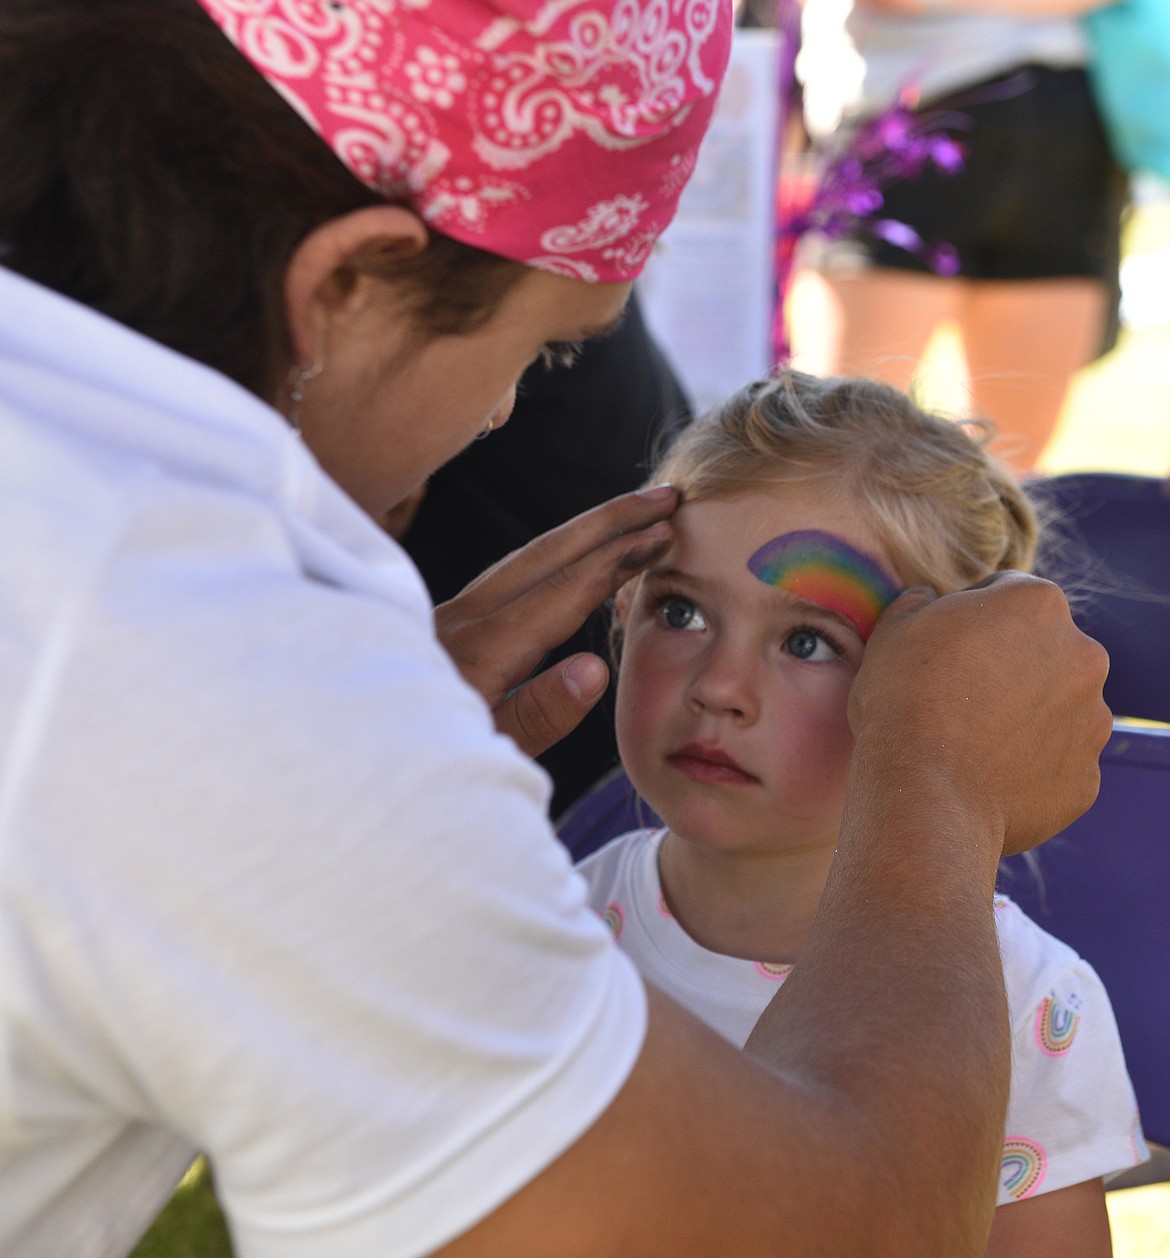 Devin Beale provided face painting at the Stumptown Art Studio booth during the Kids Fair on Aug. 3 at Logan Health Whitefish. (Julie Engler/Whitefish Pilot)